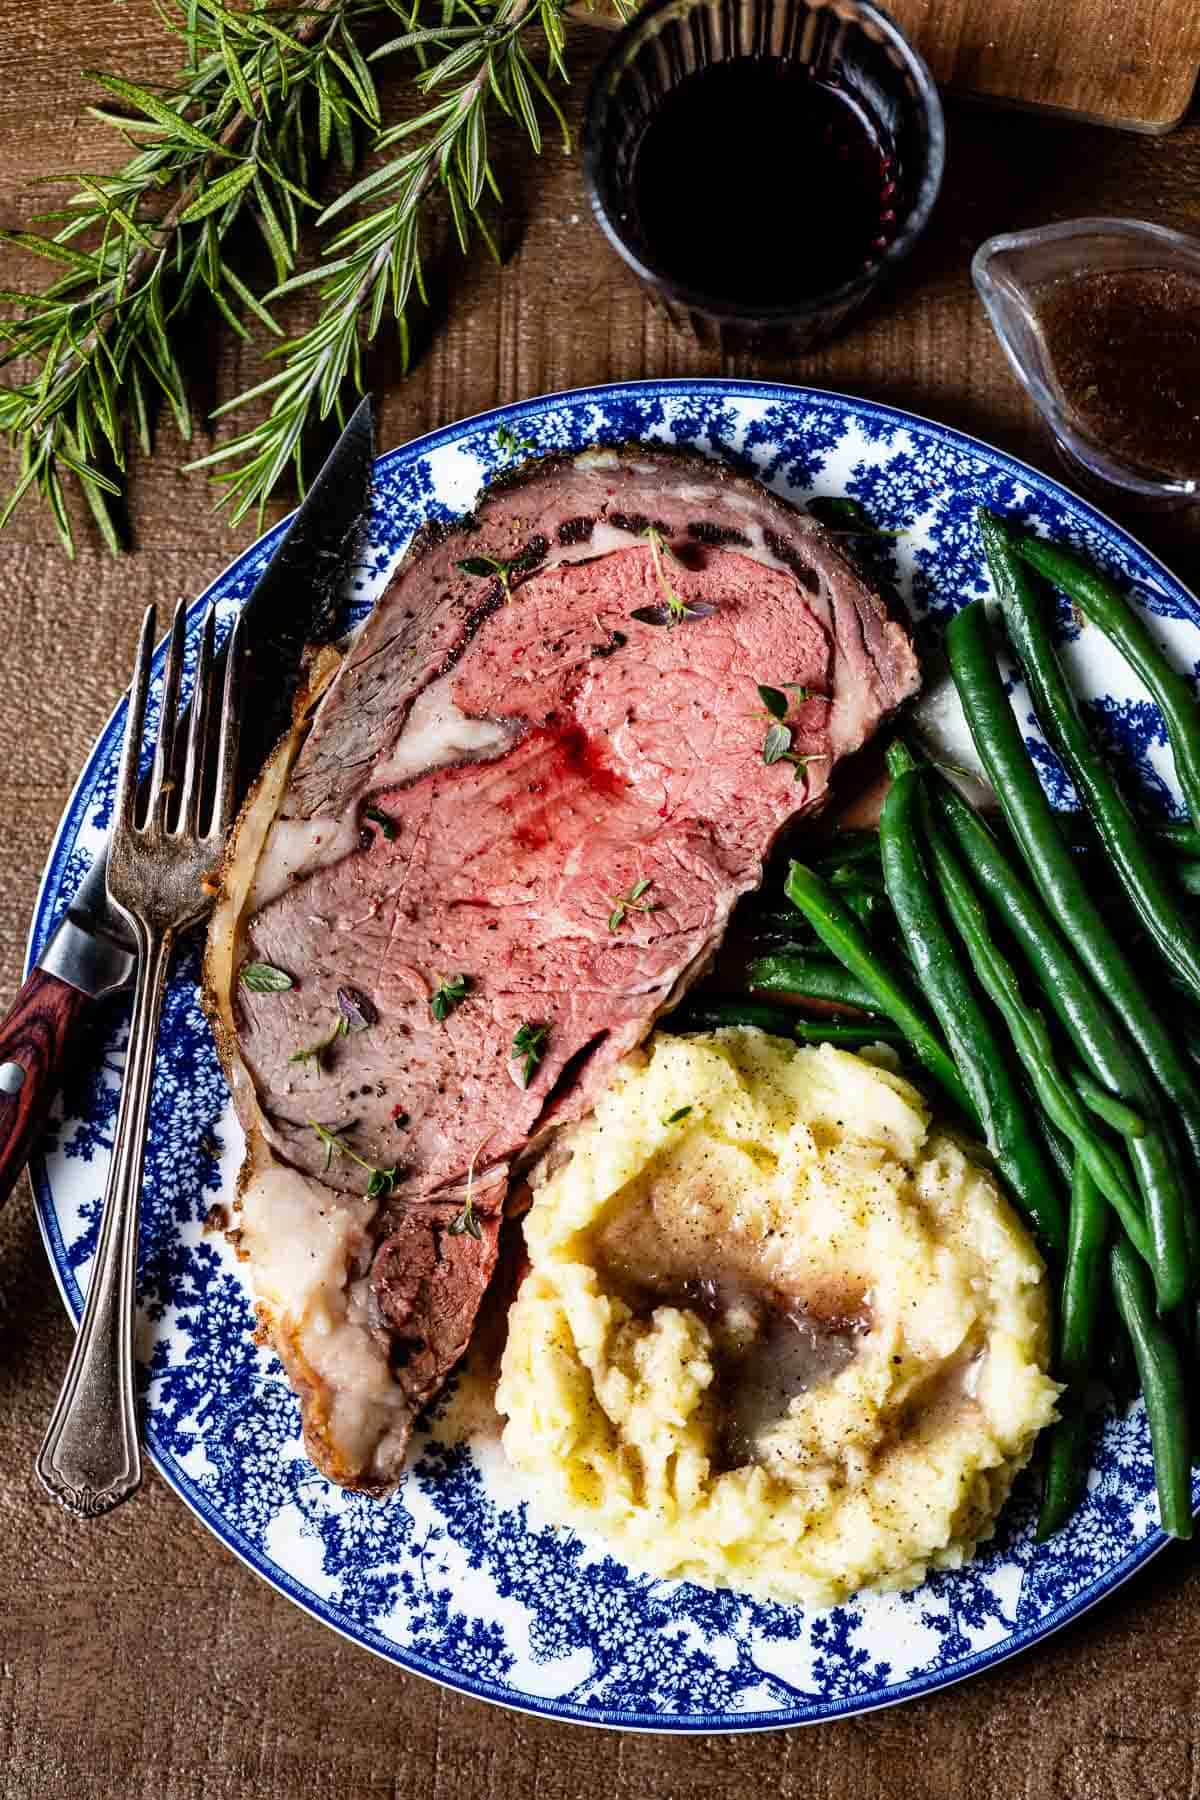 A slice of reverse seared standing rib roast served with mashed potatoes and green beans.